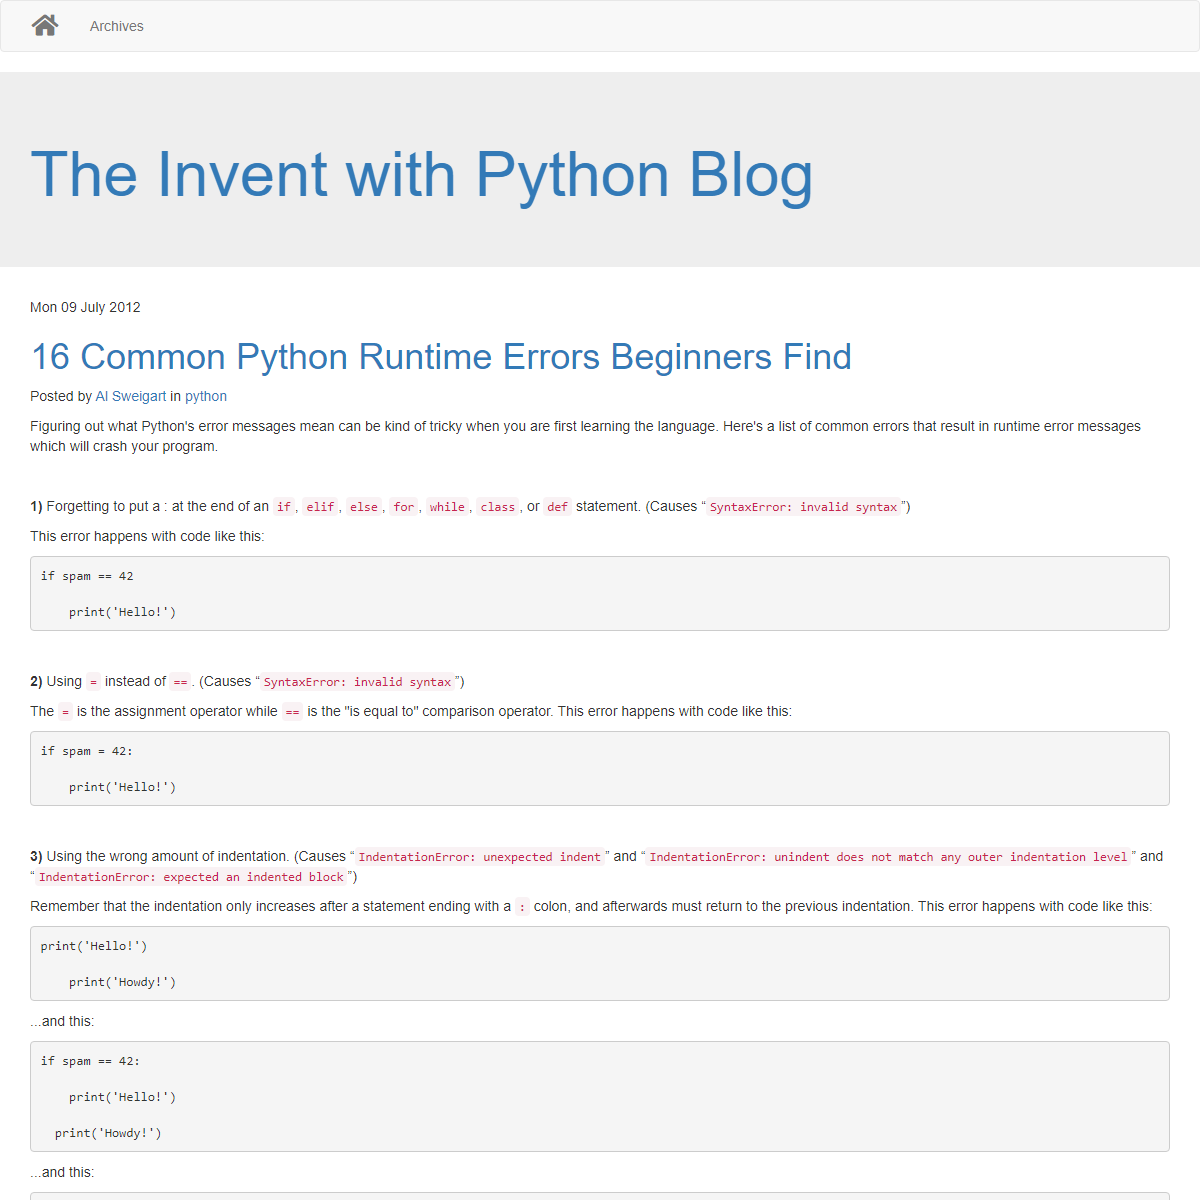 A complete backup of https://inventwithpython.com/blog/2012/07/09/16-common-python-runtime-errors-beginners-find/